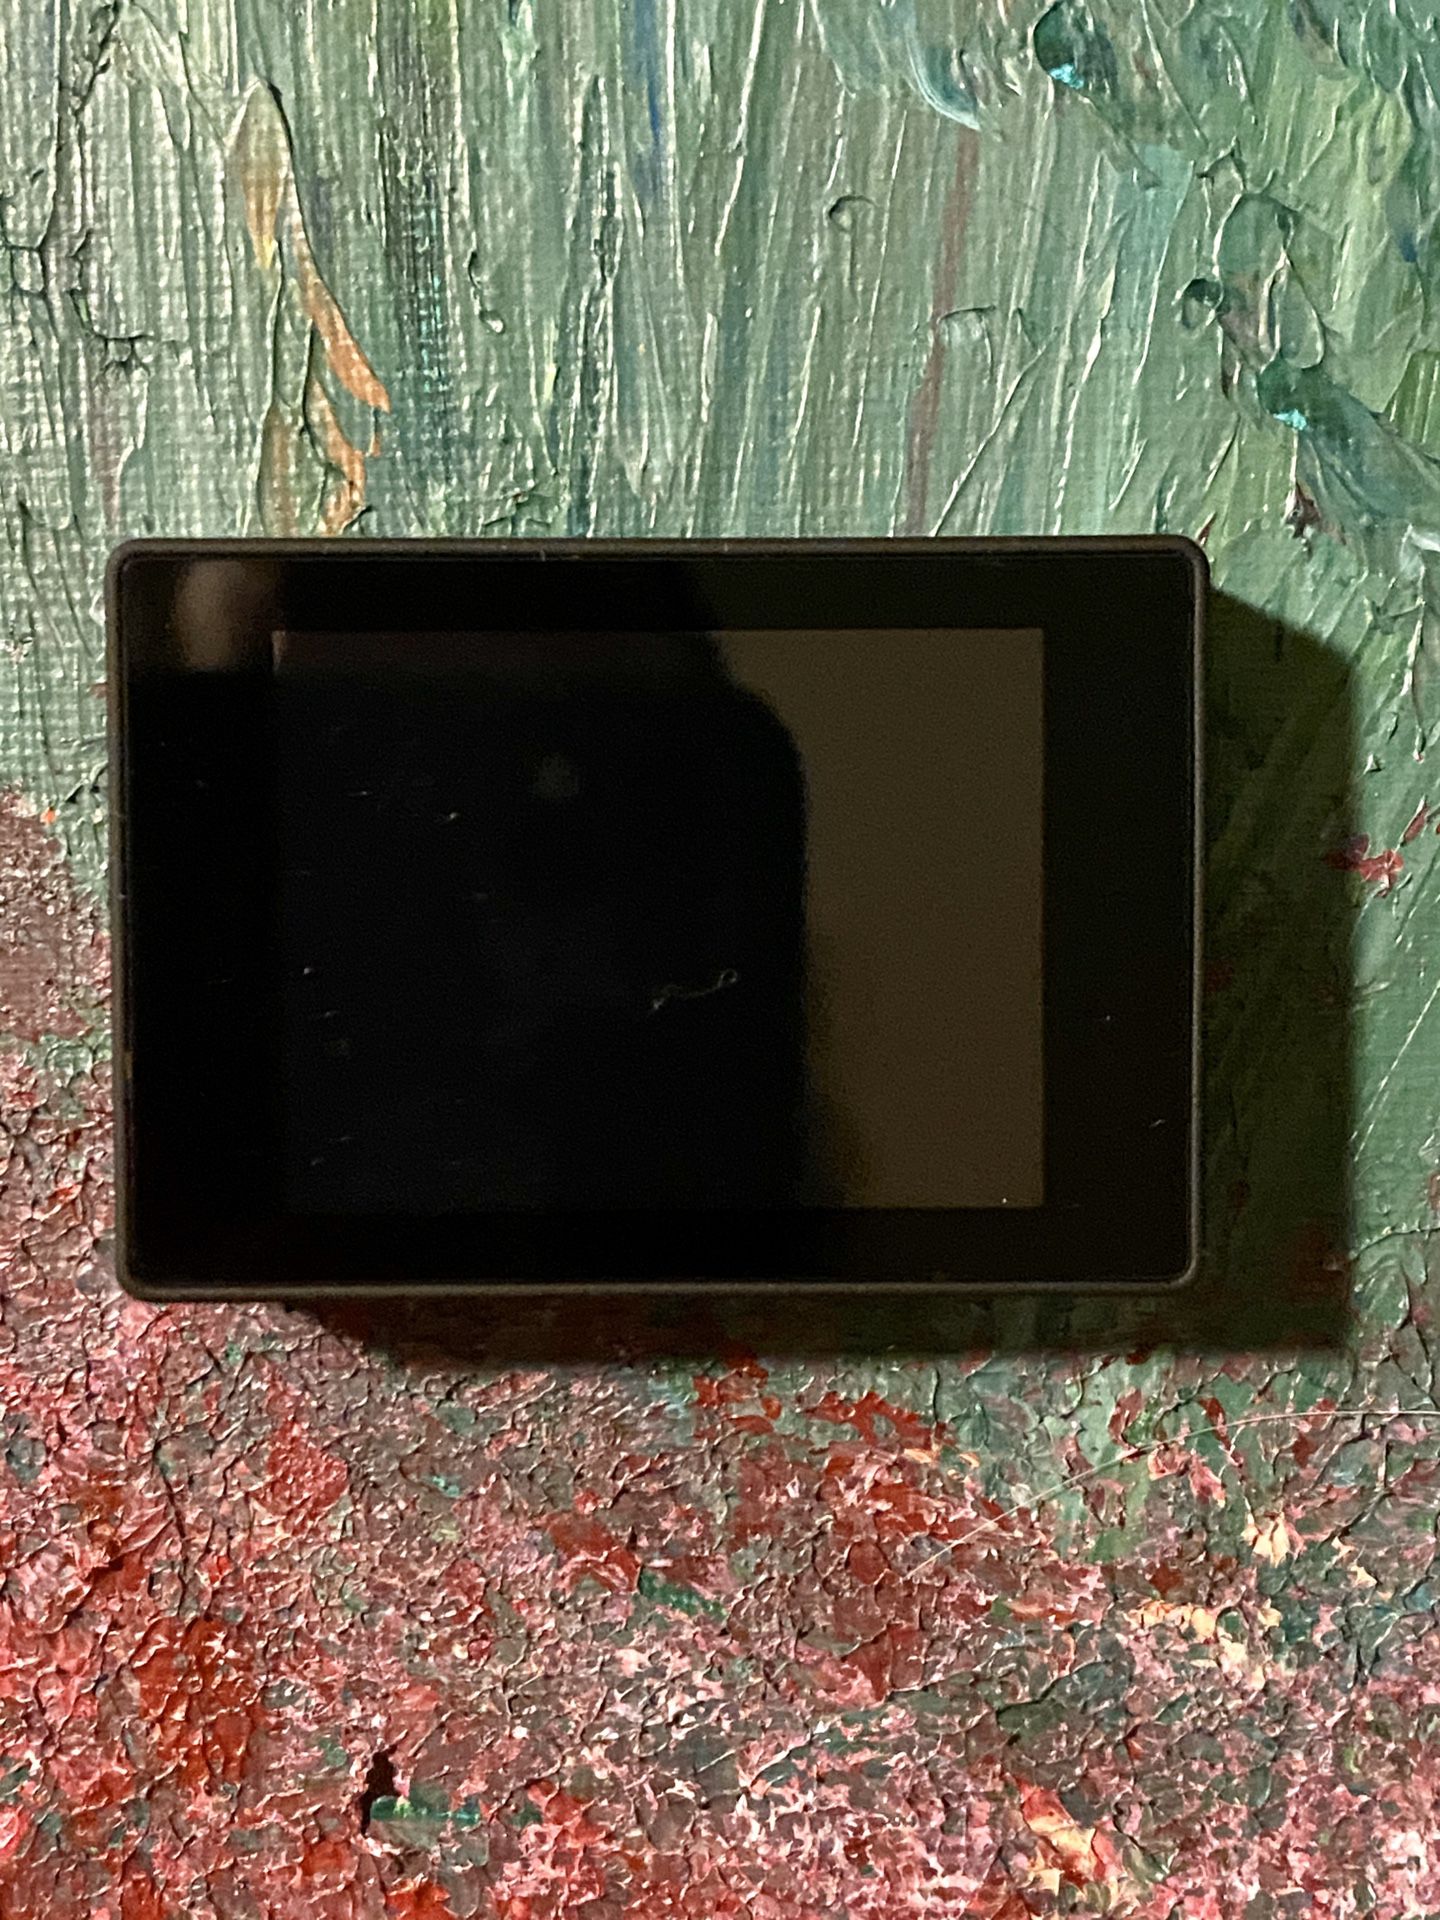 LCD touch screen for GoPro cameras